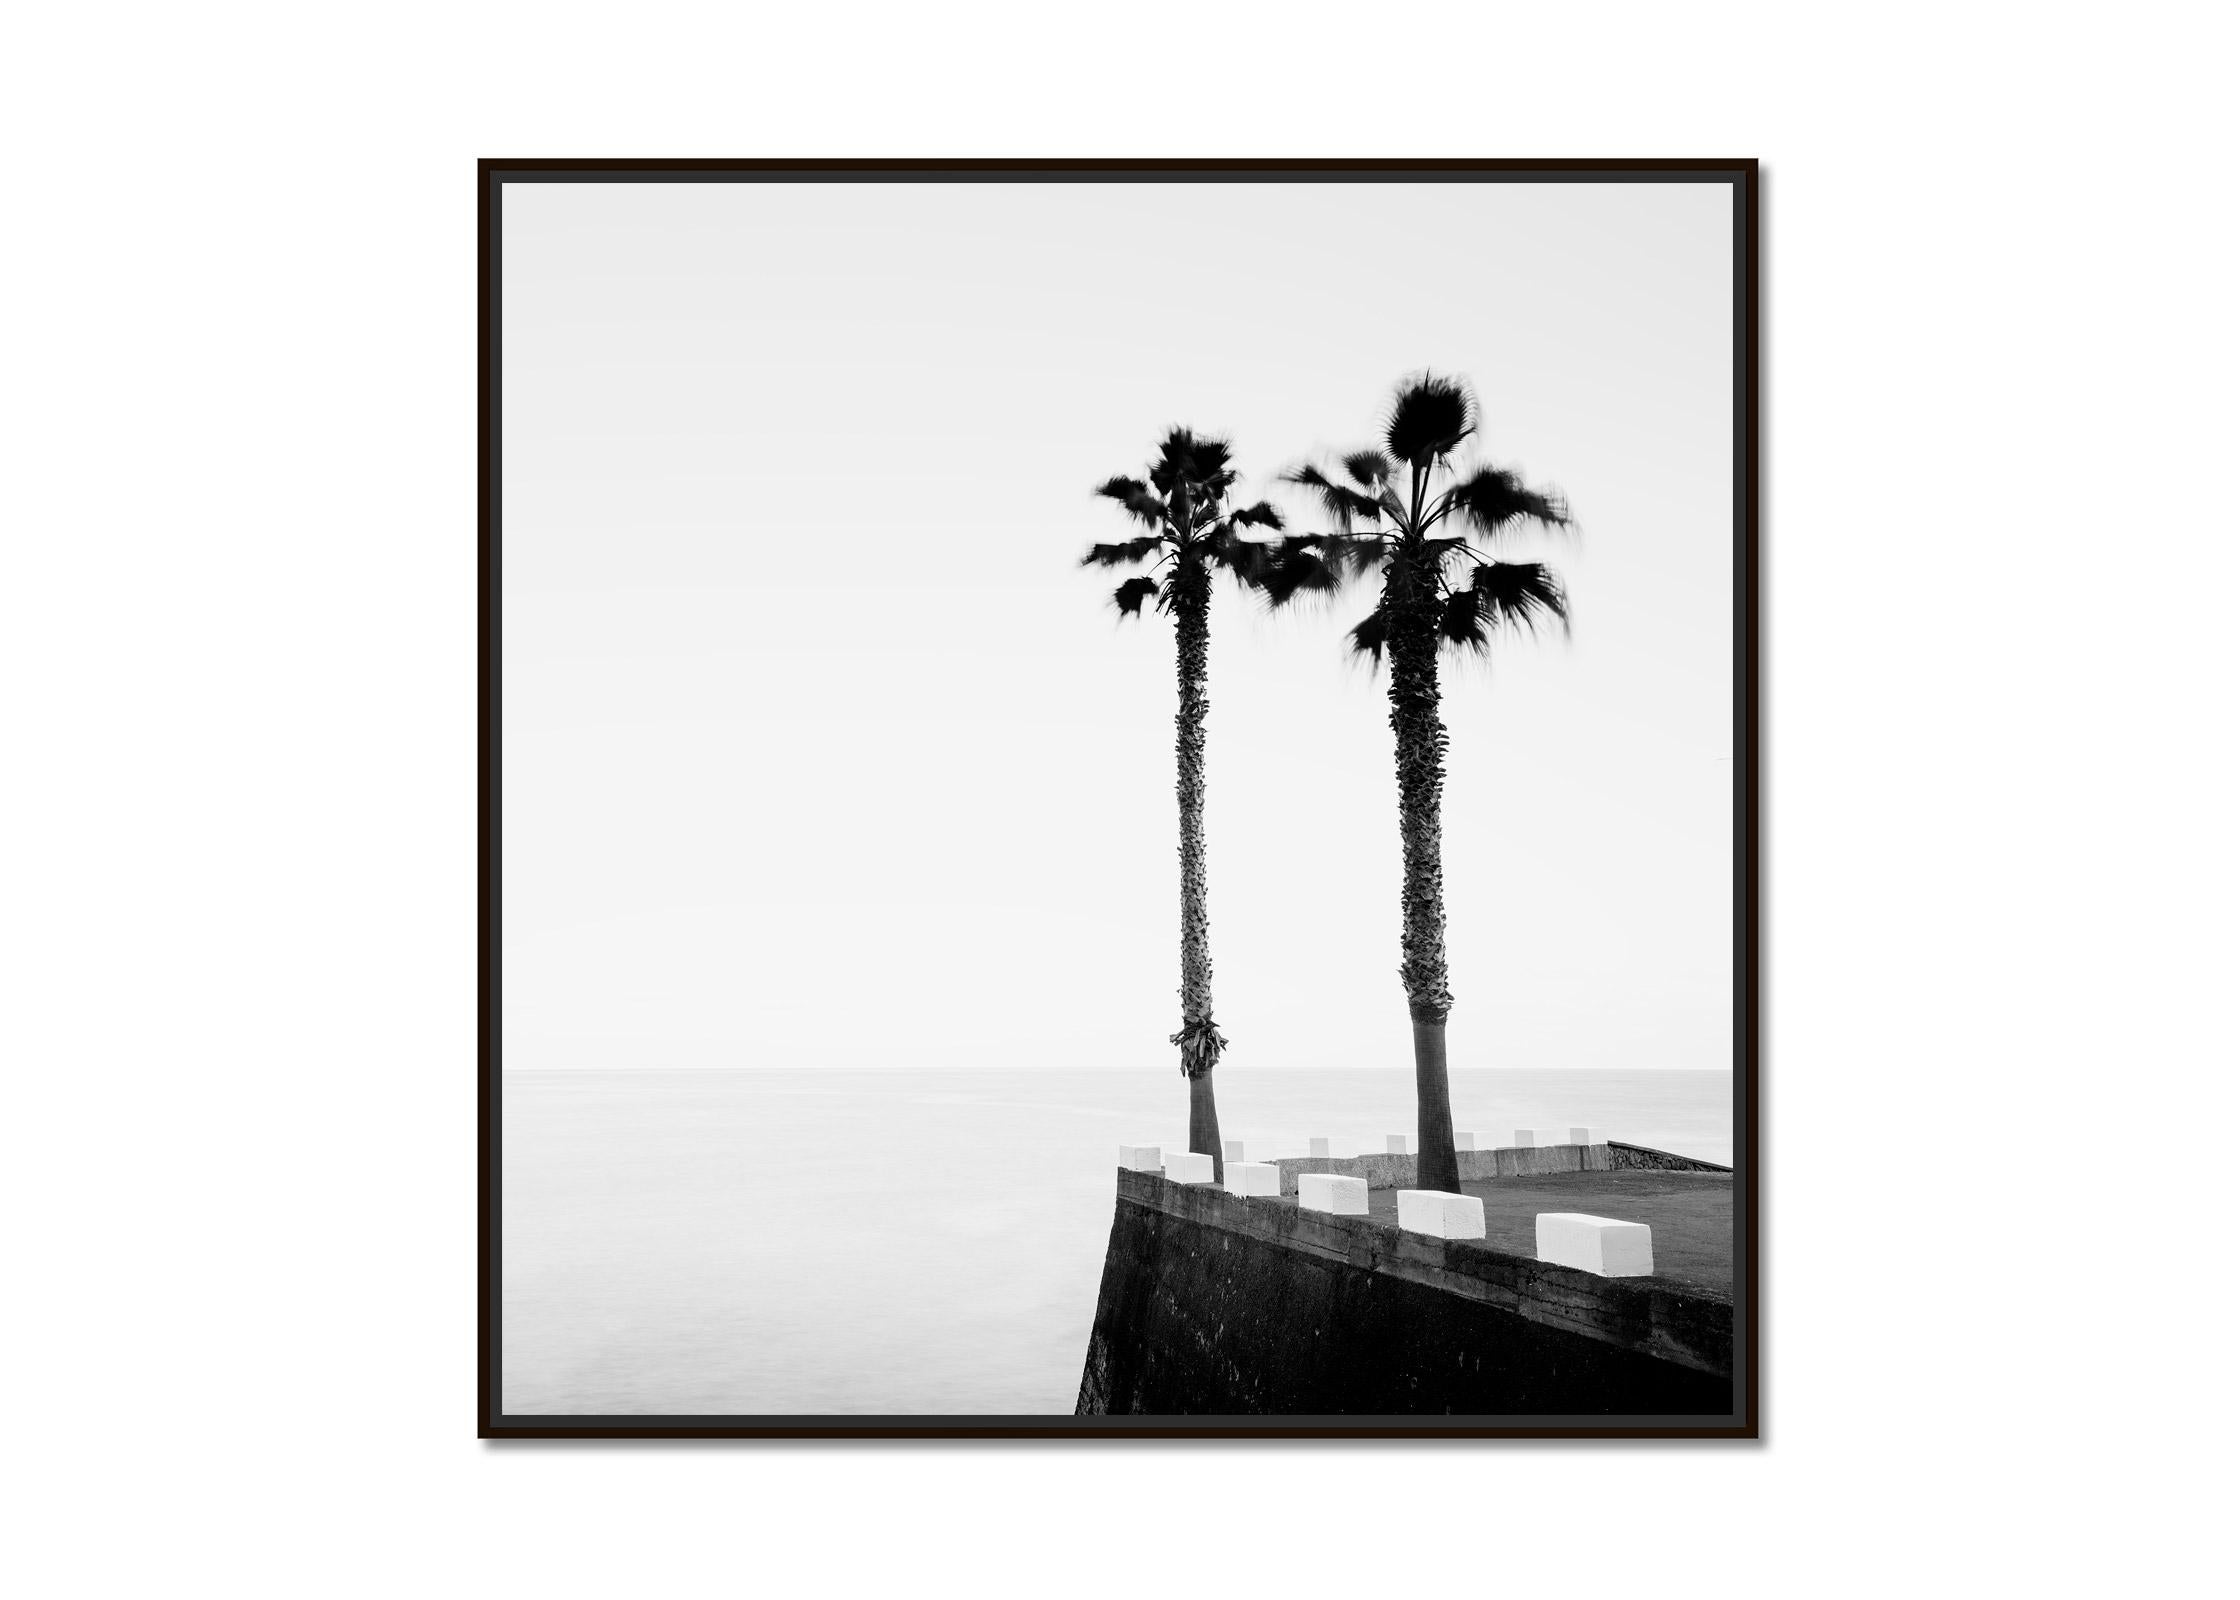 Parking lot with Palm Trees, Madeira, black and white photography, art landscape - Photograph by Gerald Berghammer